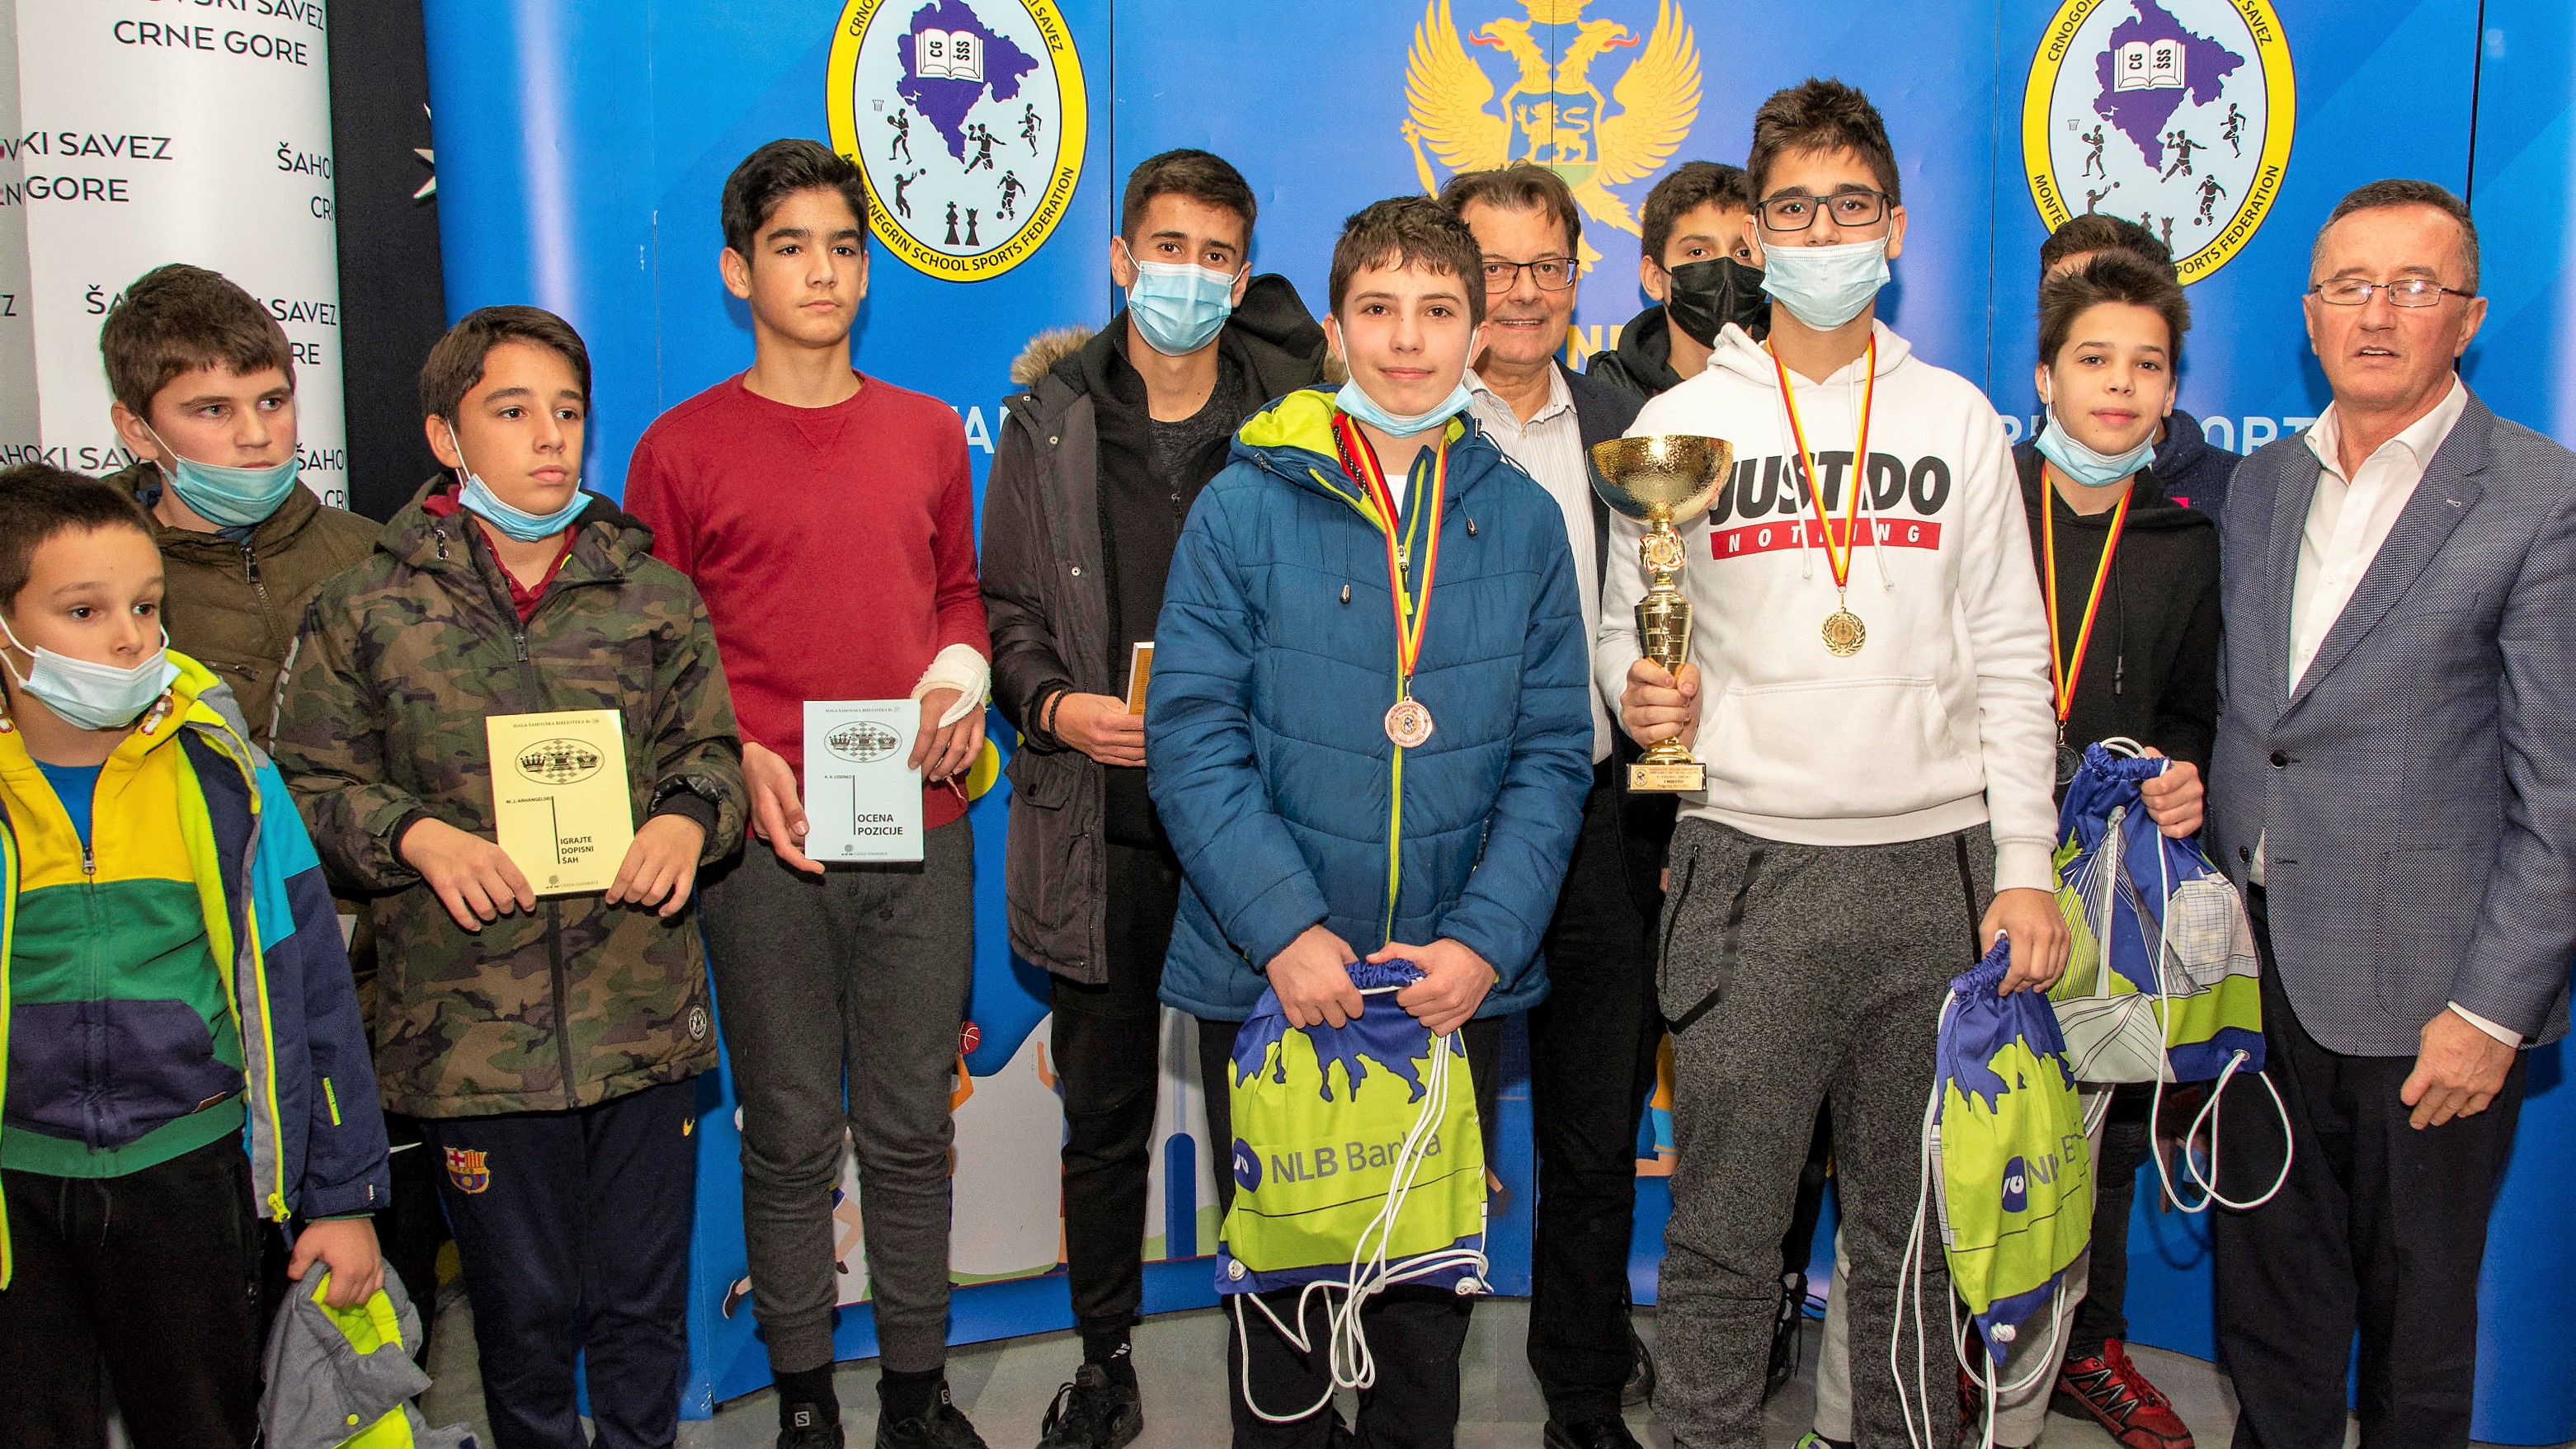 400 students took part in the largest Montenegro School Championship ever